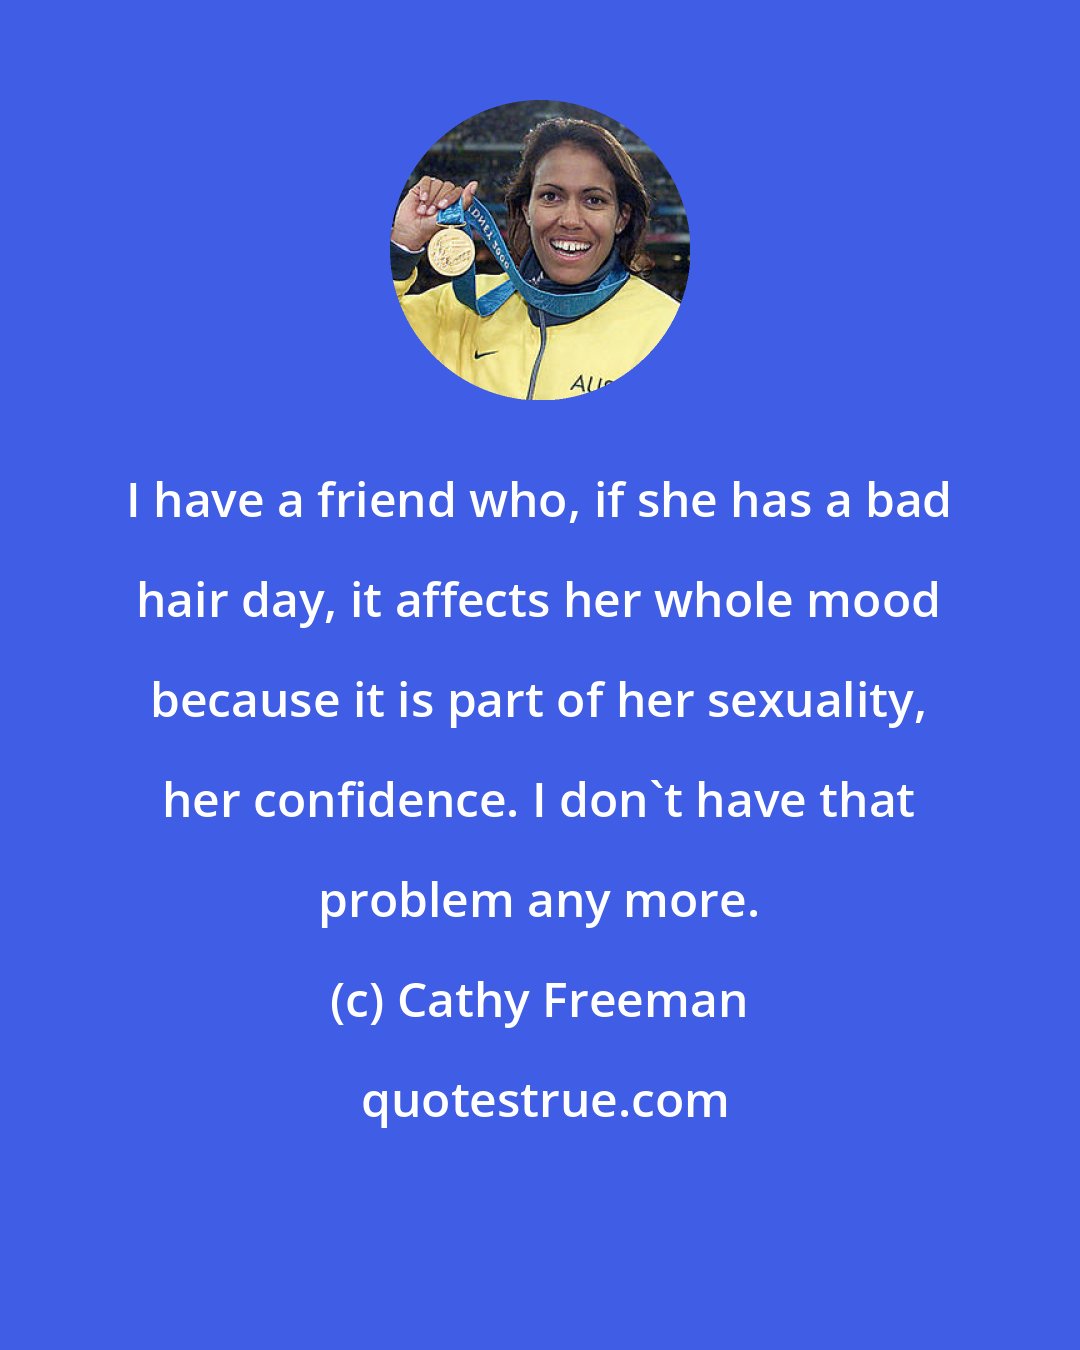 Cathy Freeman: I have a friend who, if she has a bad hair day, it affects her whole mood because it is part of her sexuality, her confidence. I don't have that problem any more.